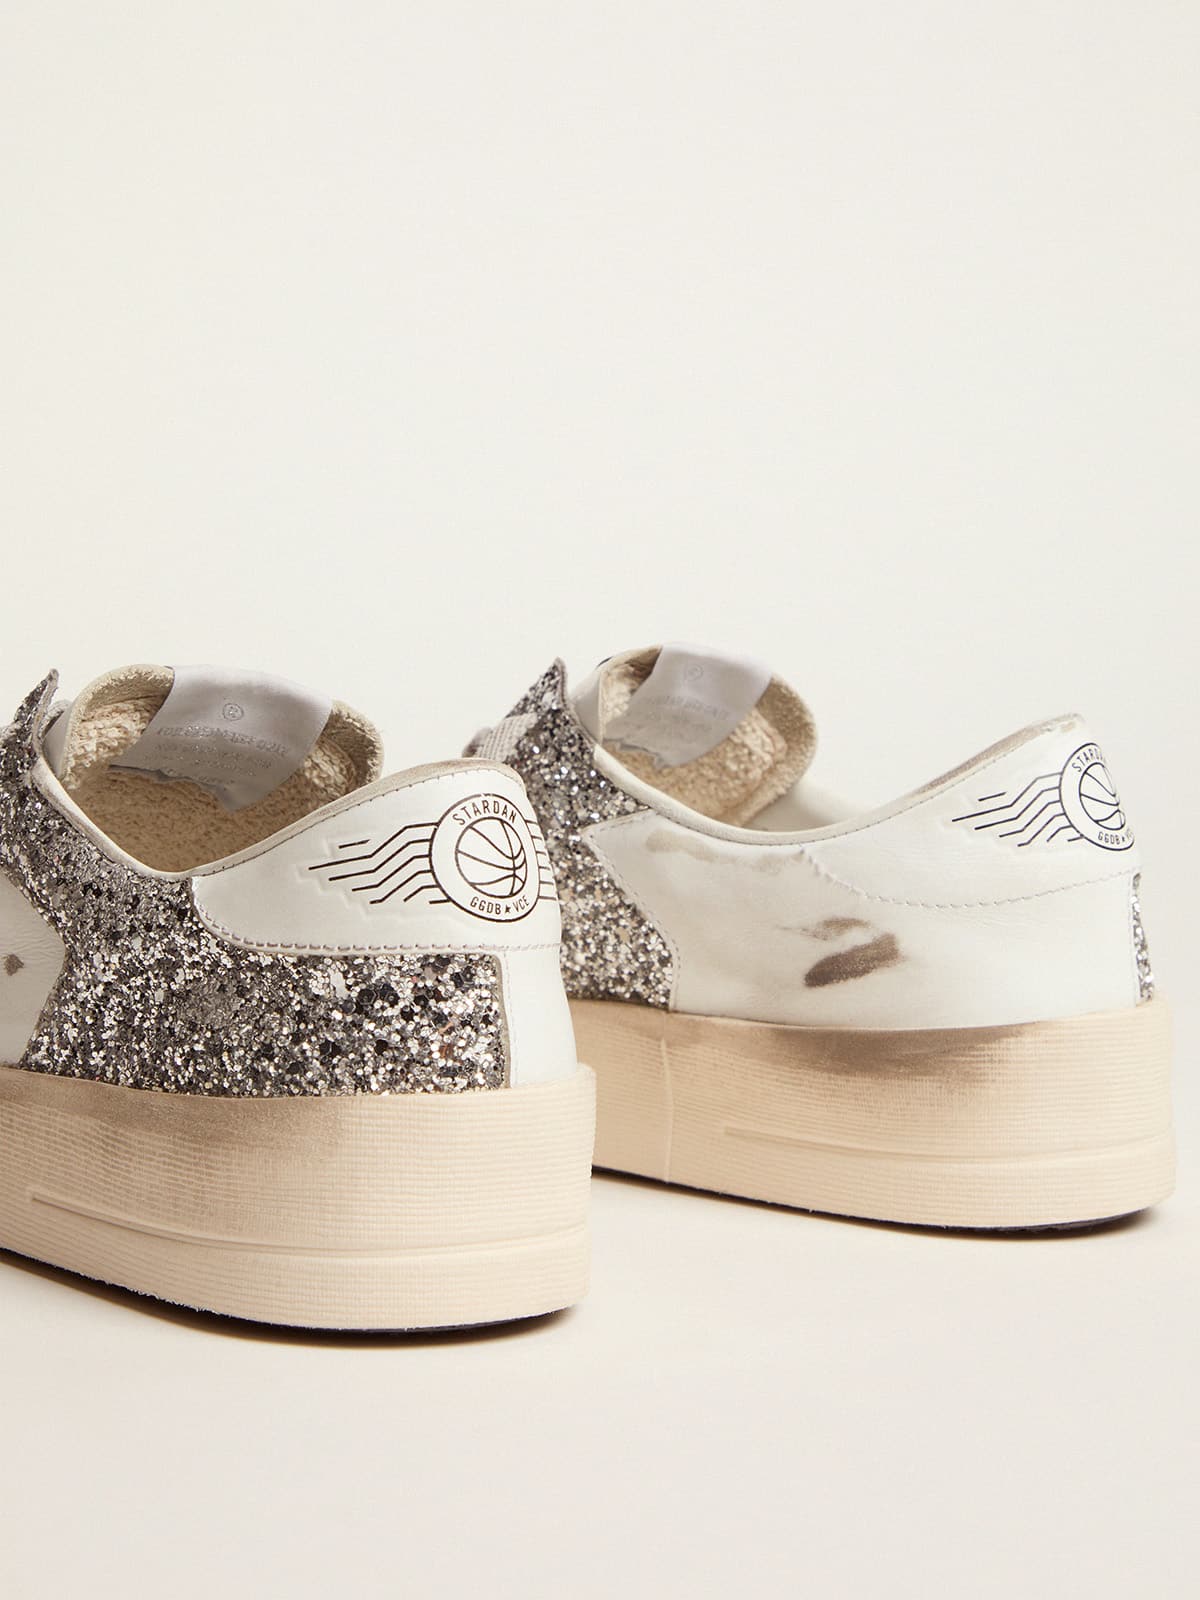 Women's Stardan in white leather and glitter